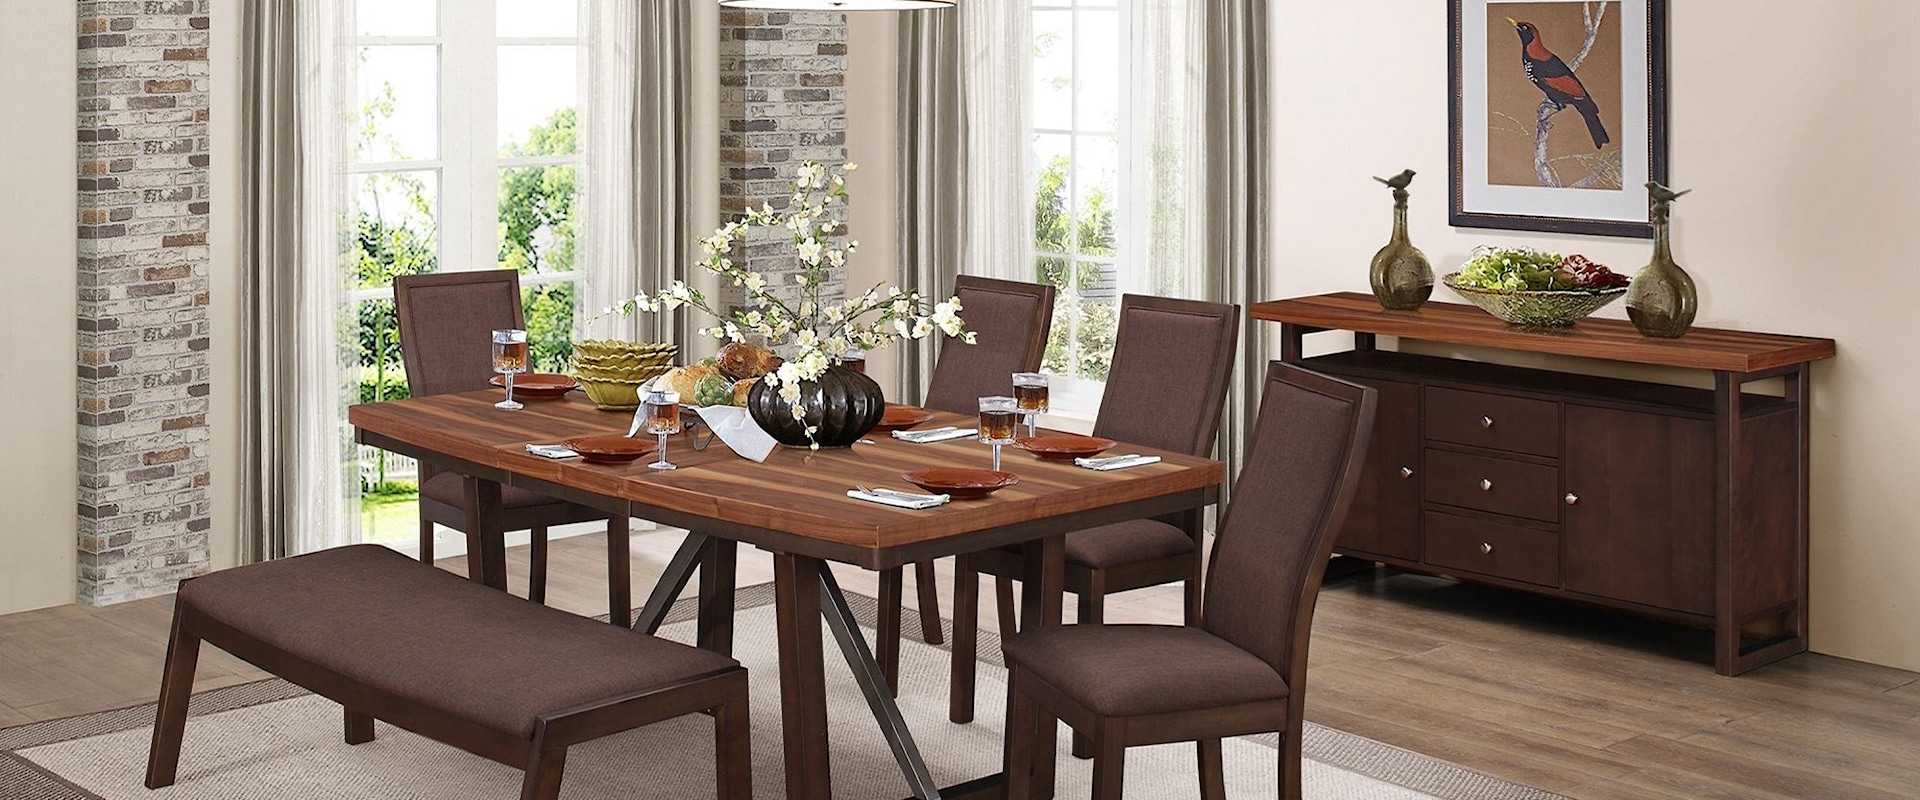 Contemporary Dining Room Group with Self-Storing Table Leaf and Bench